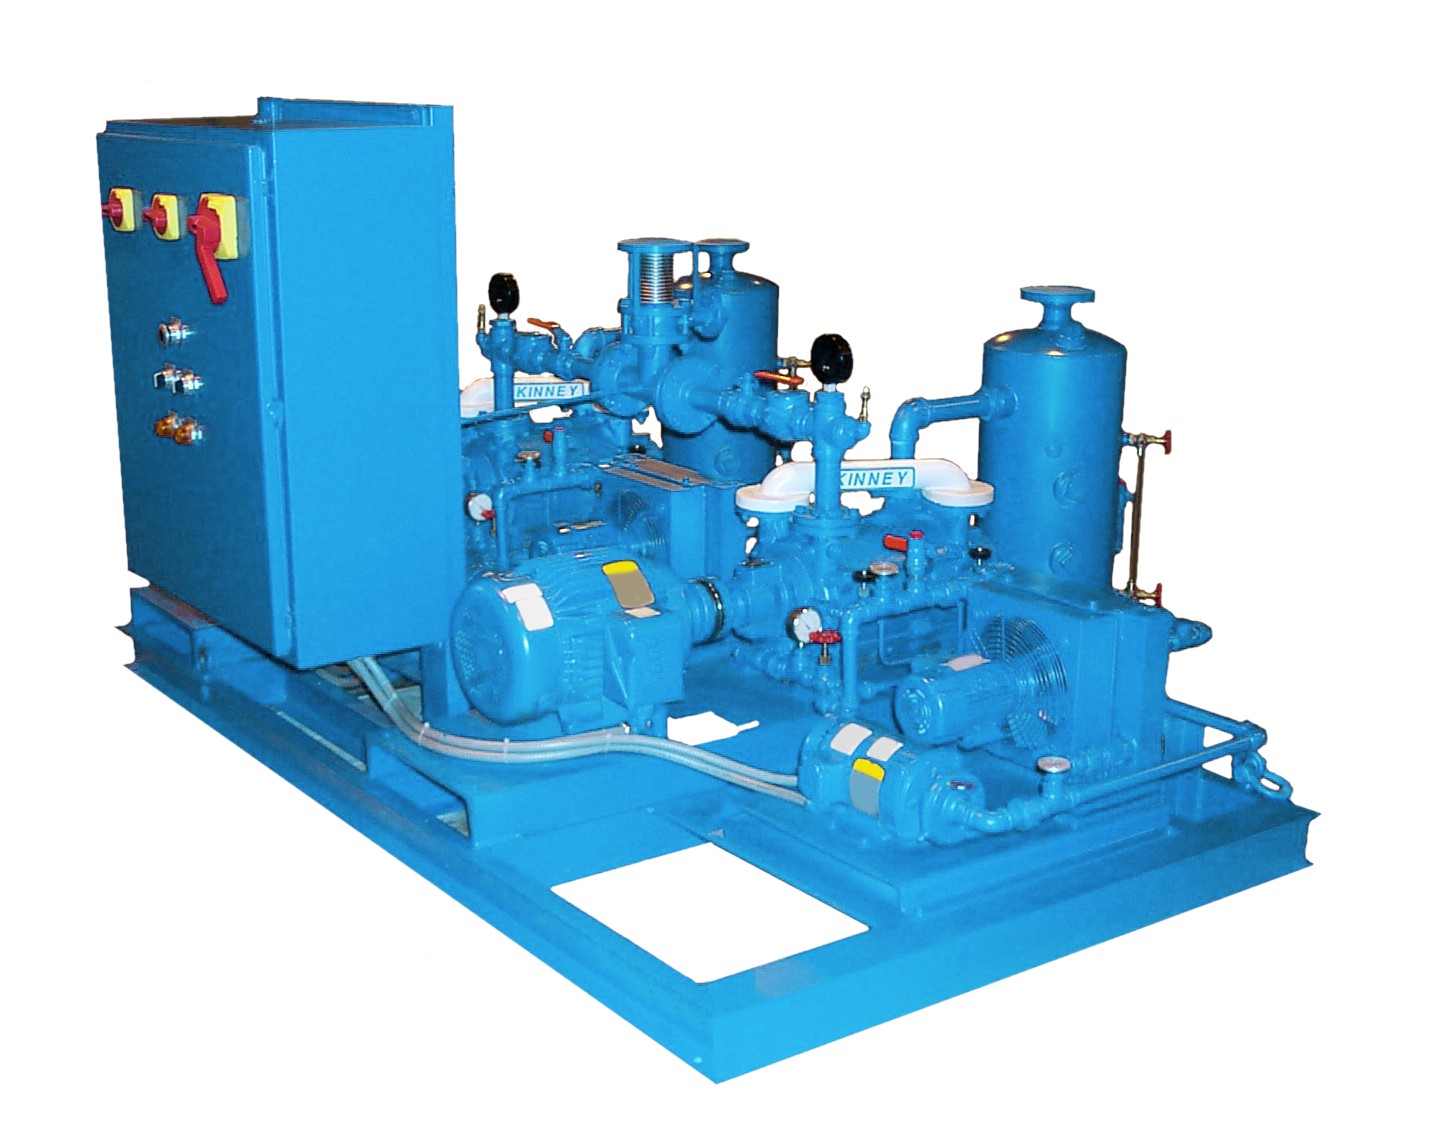 Liquid Ring Vacuum Pump with Mechanical Seals, ACRP, by MD-Kinney. ACRP Liquid Ring Vacuum Systems are fully assembled liquid ring vacuum systems with all required system piping. Air-cooled liquid ring pumps and self-contained vacuum systems for quiet, vibration-free operation. 